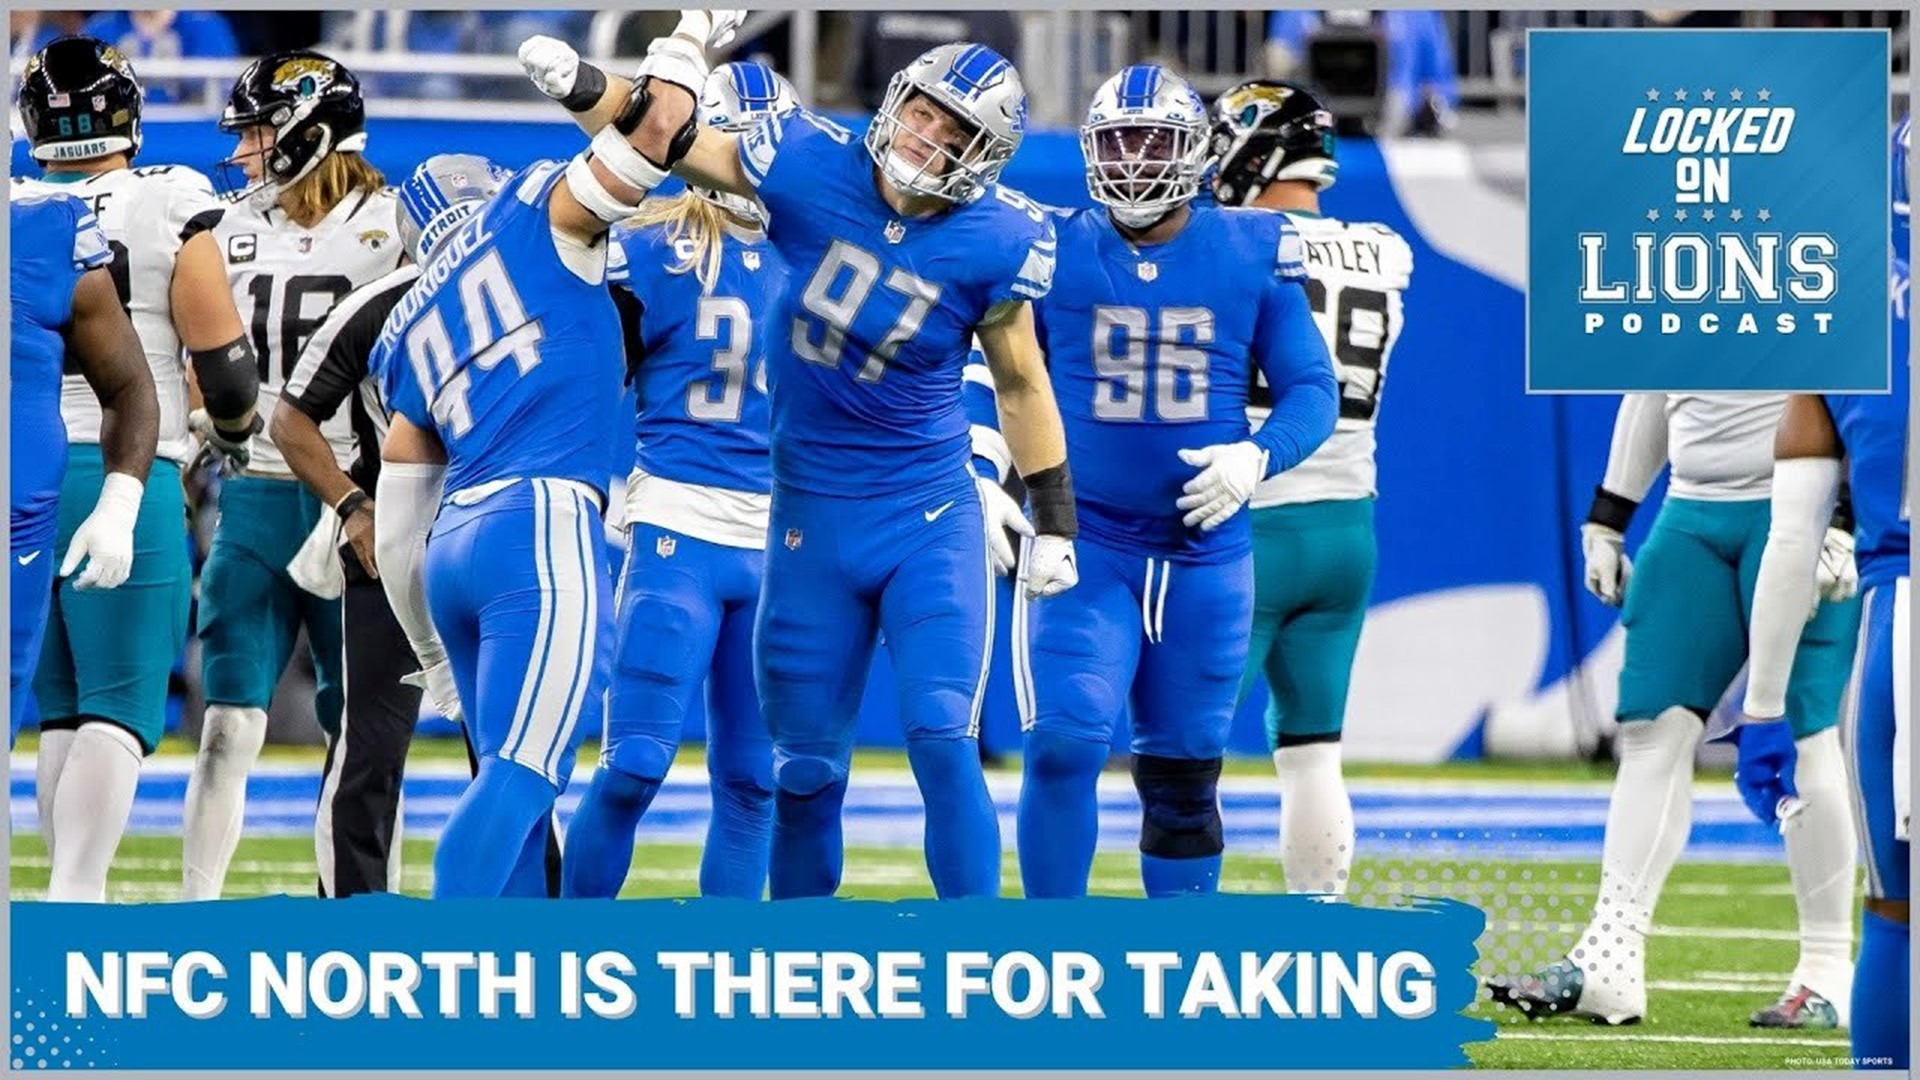 NFC North imploding around the #Lions. The Commish speaks and more. #firstlisten